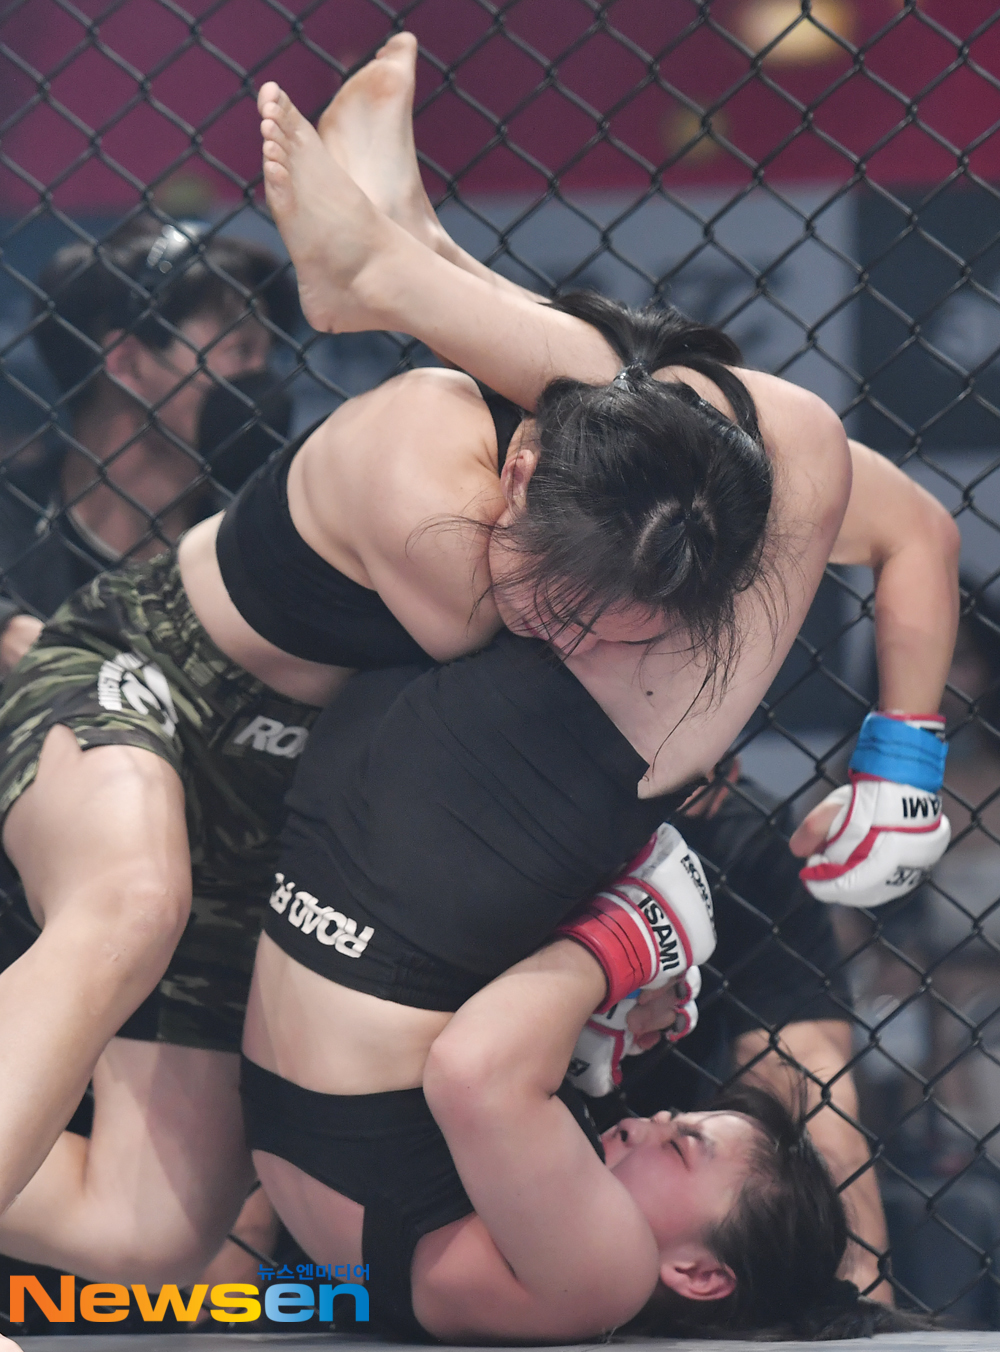 The ROAD FC ARC 003 competition was held at the Lotte World Hot Six Africa Colosseum in Jamsil, Songpa-gu, Seoul on October 17On the day, women -52kg Strawweight Shin Yoo-jin 51.9kg vs Kim Yoo-jung 52.3kg Kyonggi, Kim Yoo-jung is attacking in the first round.▲ 8th game -97kg contract weight Kim Eun-soo 97.3kg (Pass) VS Oilology 94.9kg▲ 7th game unlimited class Bae Dong-hyun 113kg VS Ryu Ki-hoon 134.4kg]▲ 6th game -72kg contract weight Park Chan-soo 72.4kg VS Park Si-won 72.3kg▲ 5th game -69kg contract weight 67.1kg for Yangji VS Hanmin type 68.9kg▲ 4th game -65.5kg featherweight Ji Young-min 65.4kg VS Go Dong-hyuk 62.5kg▲ 3rd game -52kg Straw class Shin Yu-jin 51.9kg vs Kim Yoo-jung 52.3kg▲ 2nd game -90kg contract weight 89.8kg VS Jung Seung-ho 89.1kg▲ 1st game -61.5kg bantamweight Kim Yoo-jung 61.8kg vs Min Shin-hee 61.7kgMeanwhile, all competitions hosted by ROAD FC are only available to gymnasiums and athletes registered with WFSO (World Martial Arts Association, Chairman Jeong Moon-hong).expressiveness